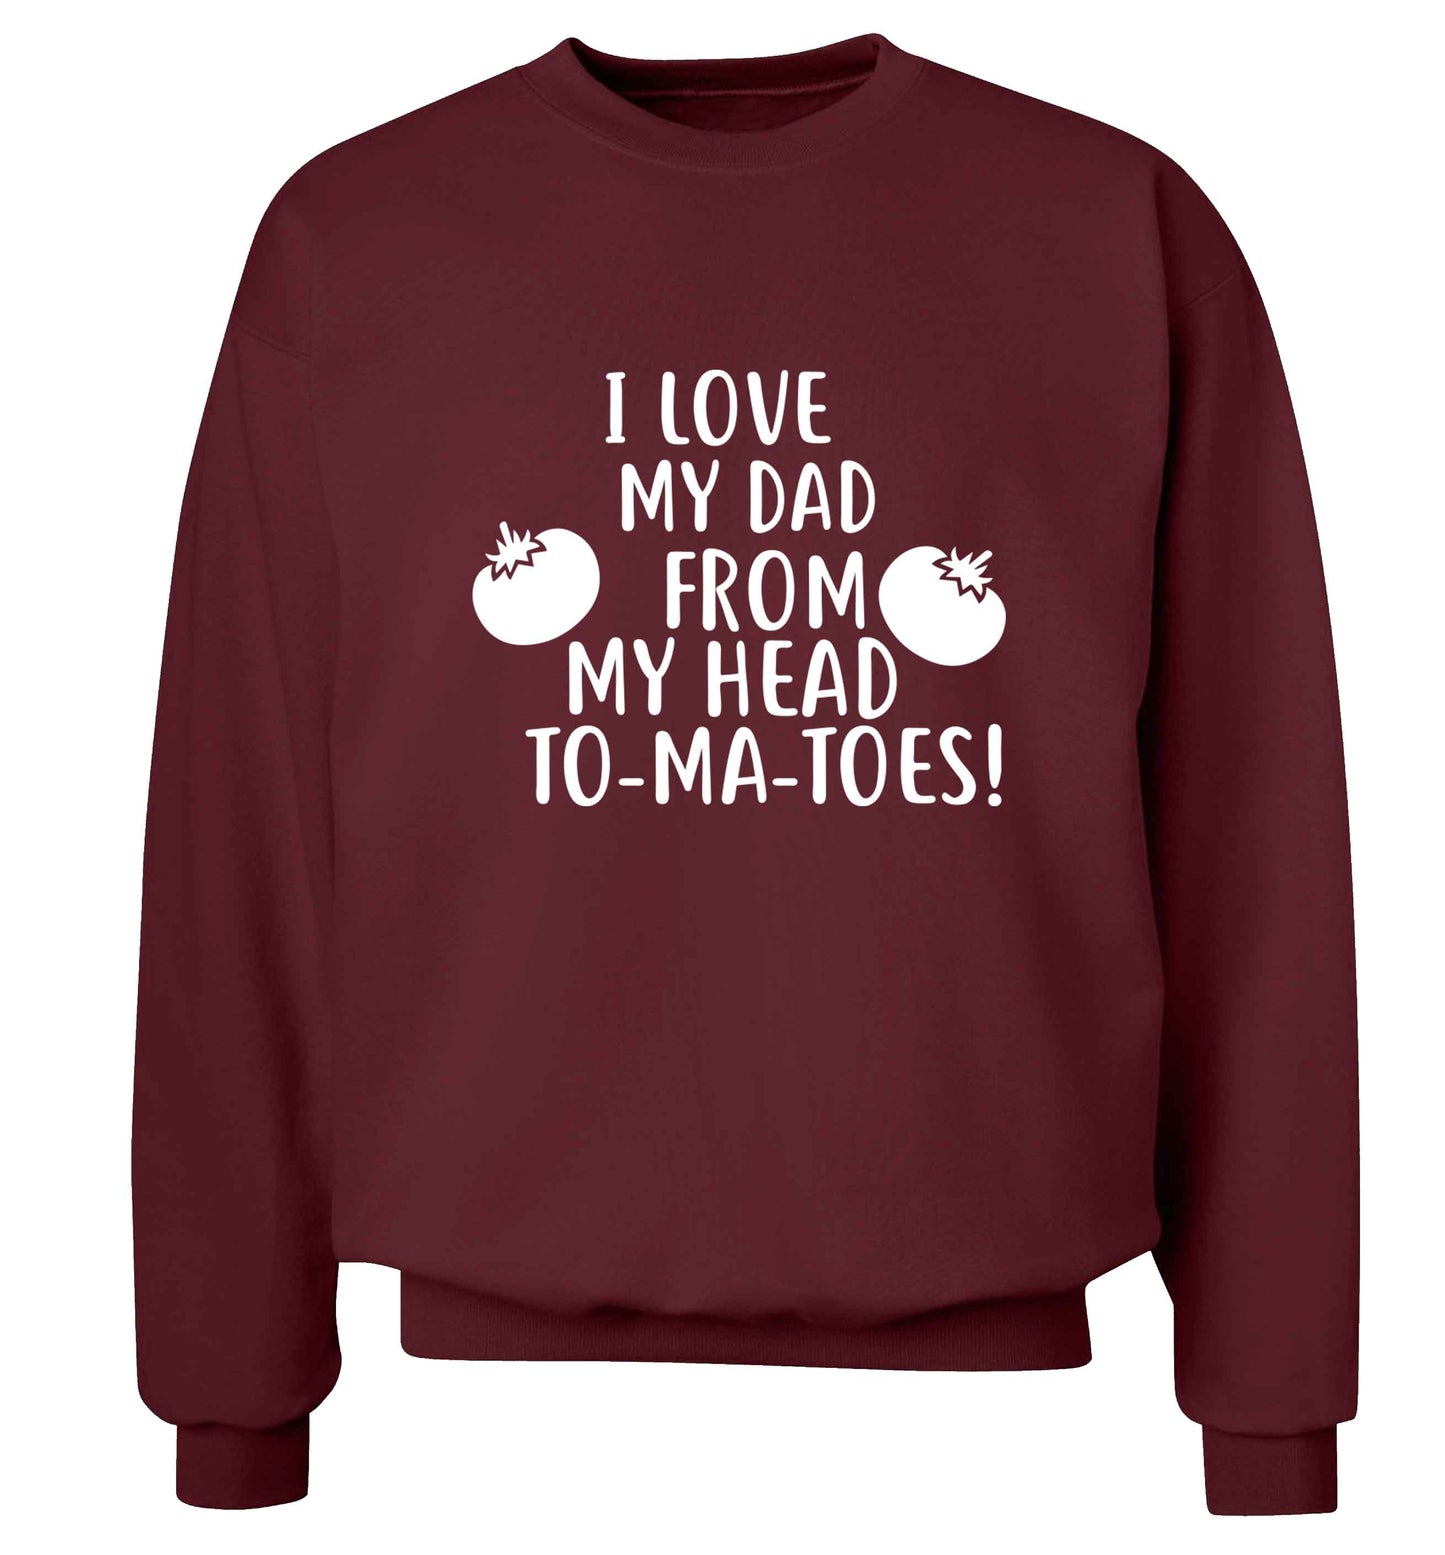 I love my dad from my head to-ma-toes adult's unisex maroon sweater 2XL